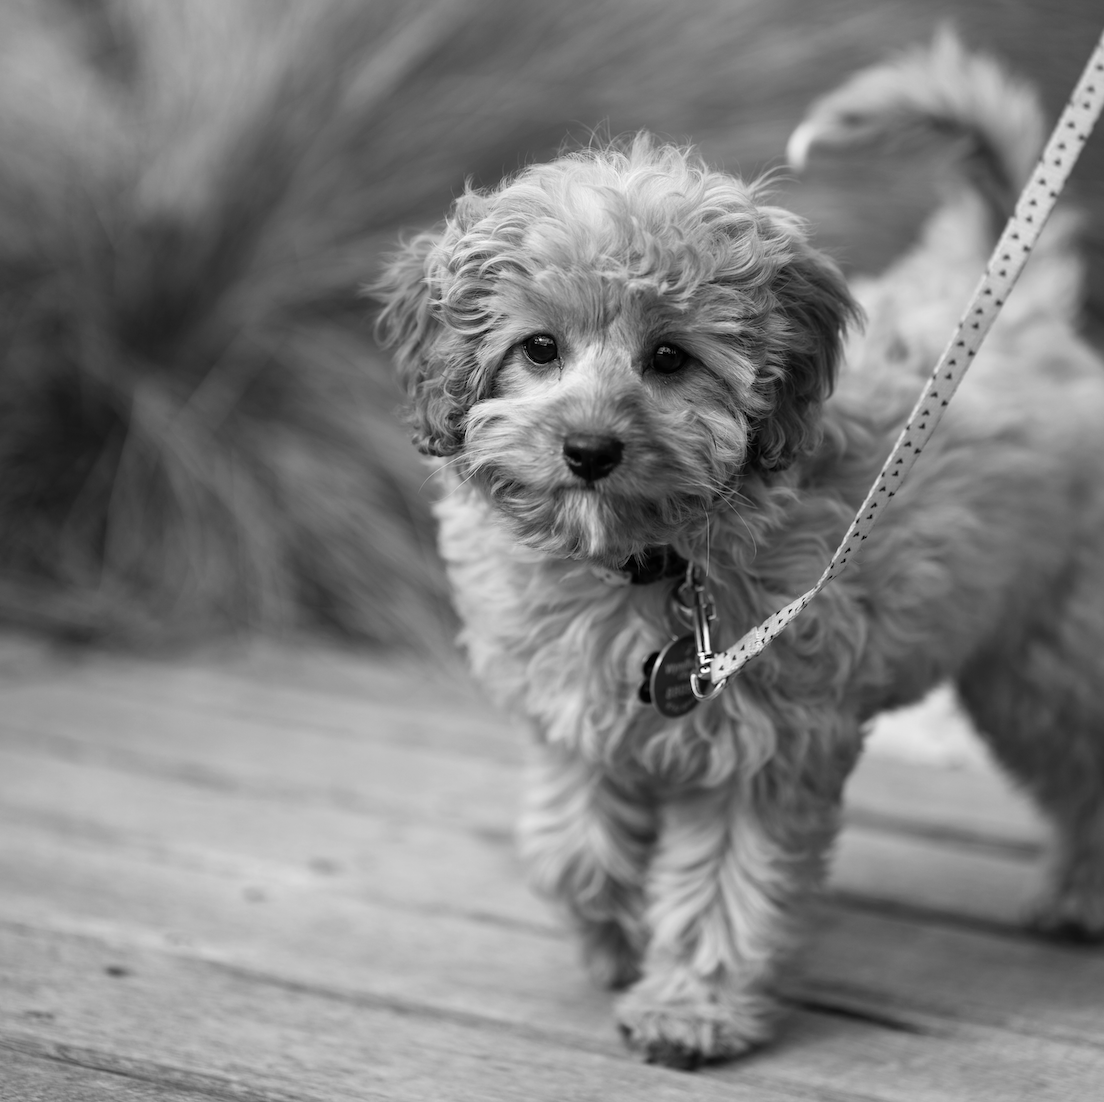 3 main reasons COVID-19 inflated the price of cavoodle puppies in Australia